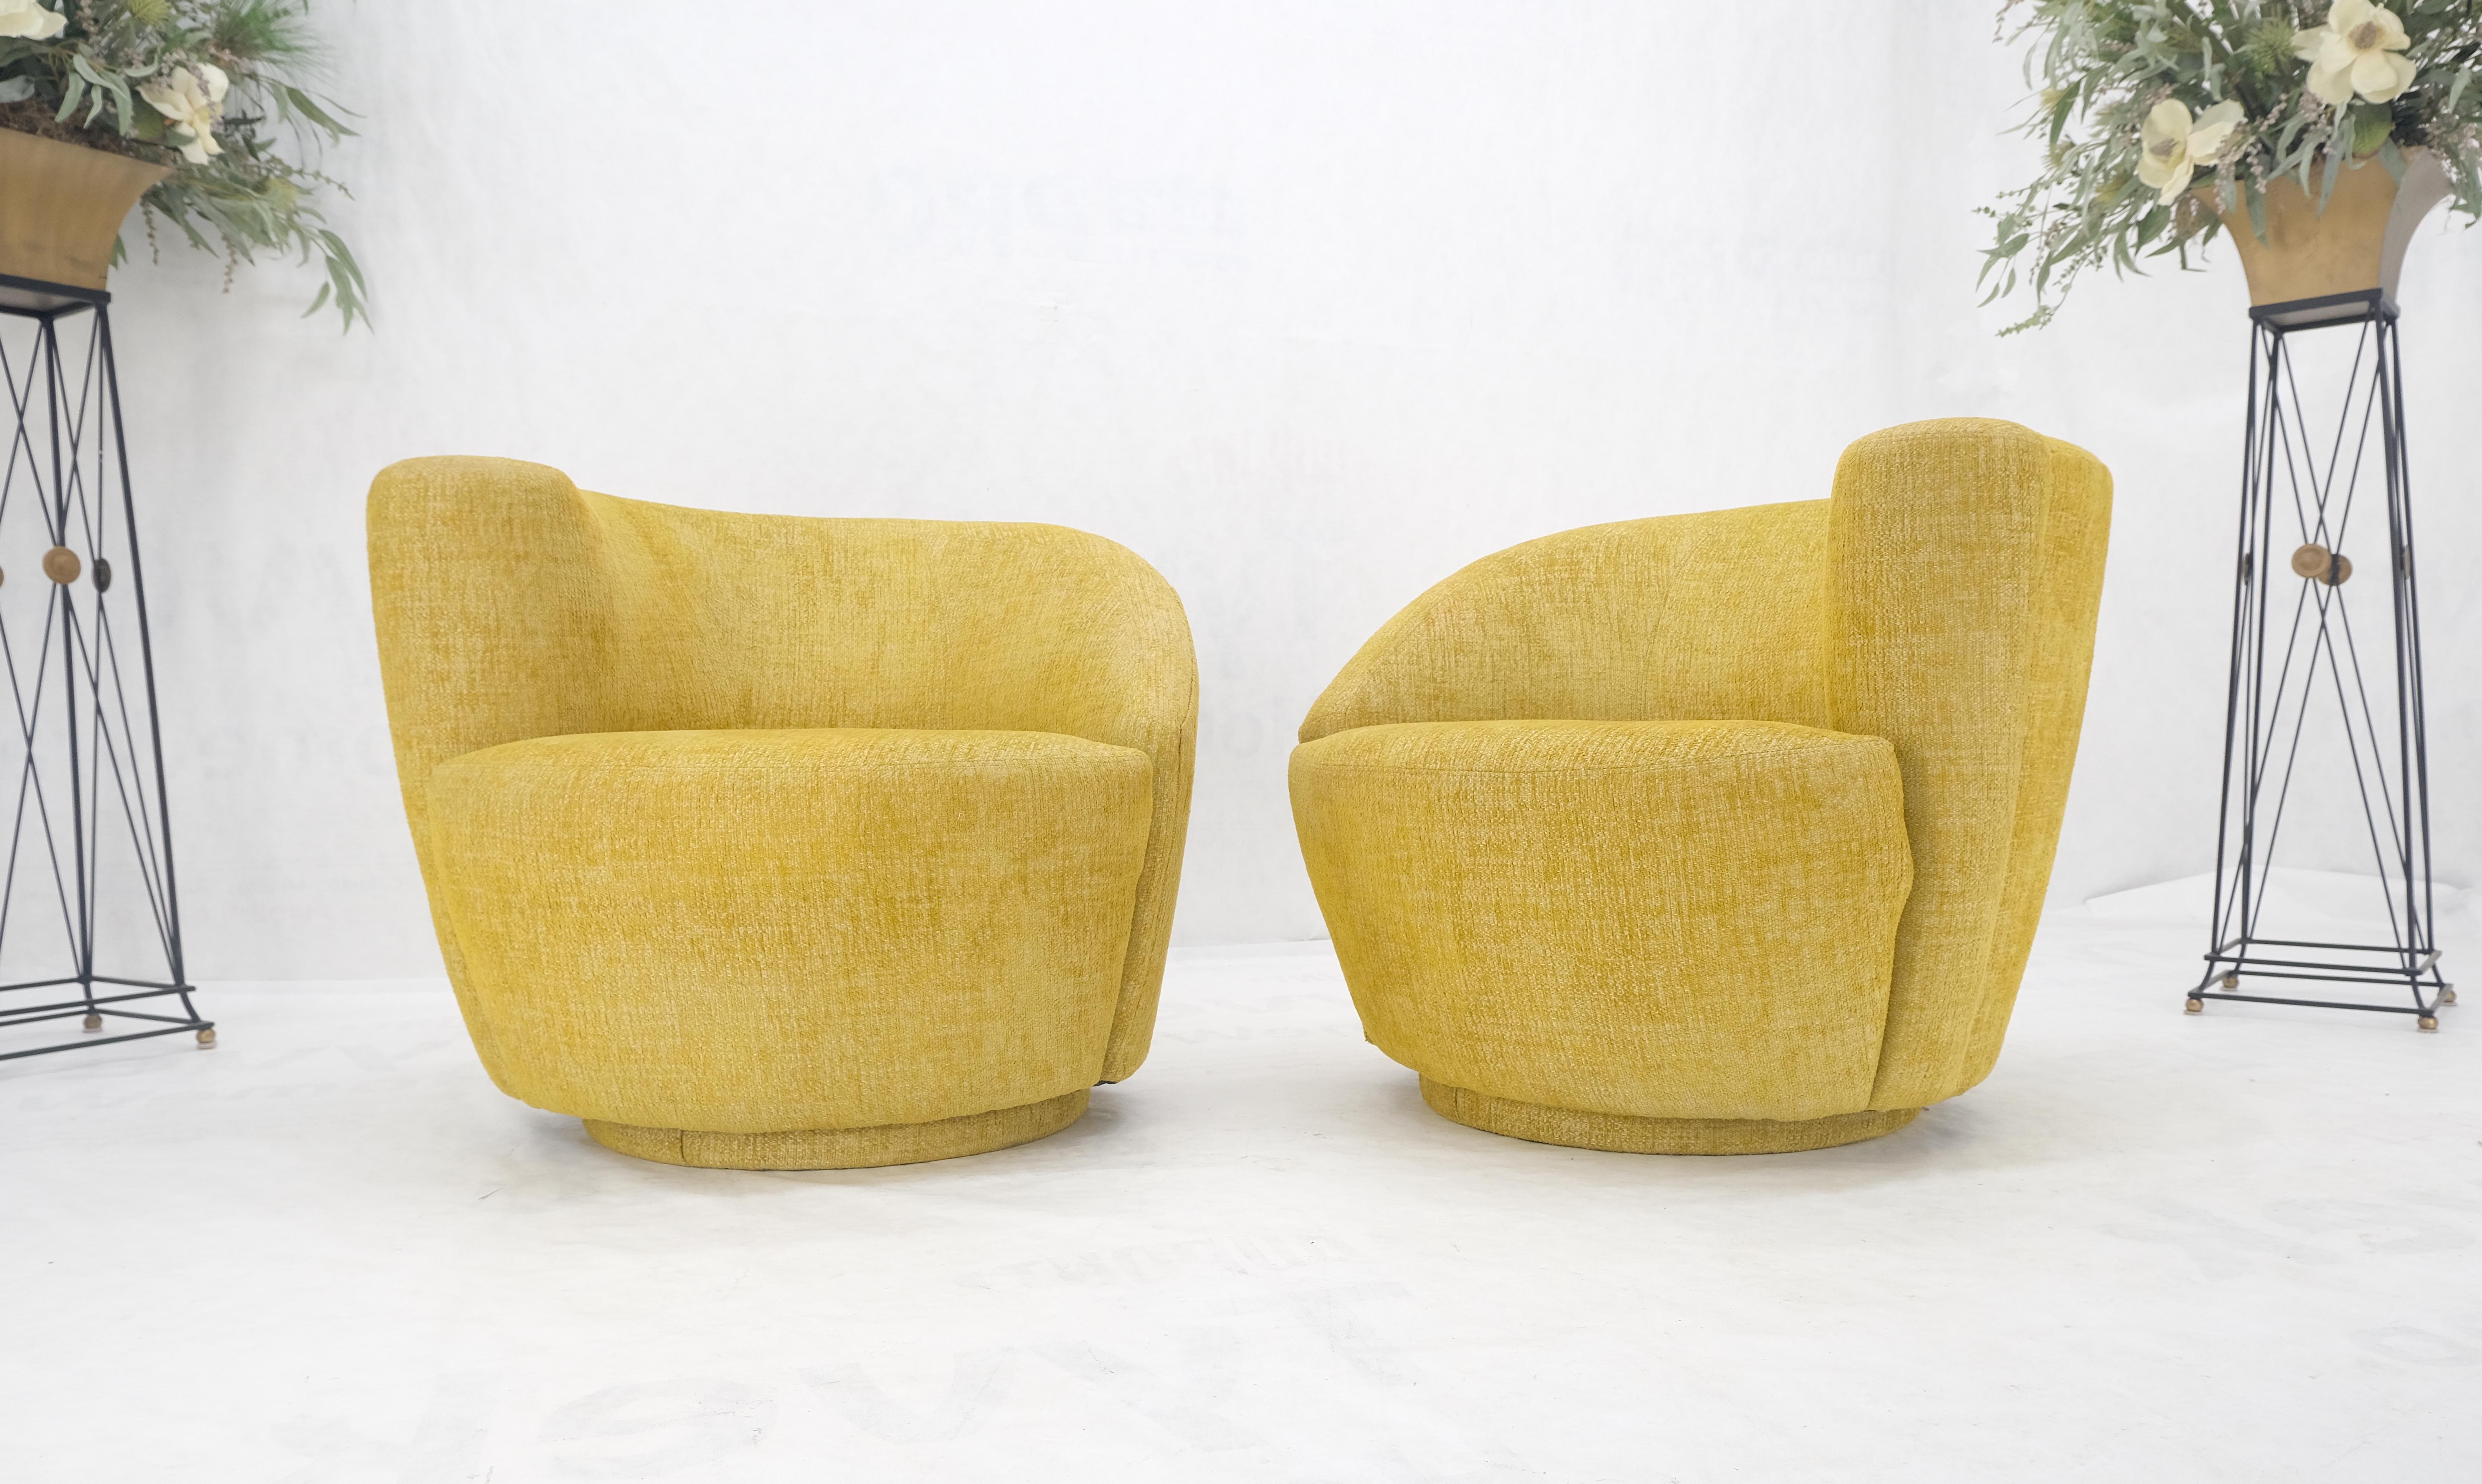 Upholstery Pair of Vladimir Kagan for Directional Nautilus Chairs Yellow Gold MINT! For Sale